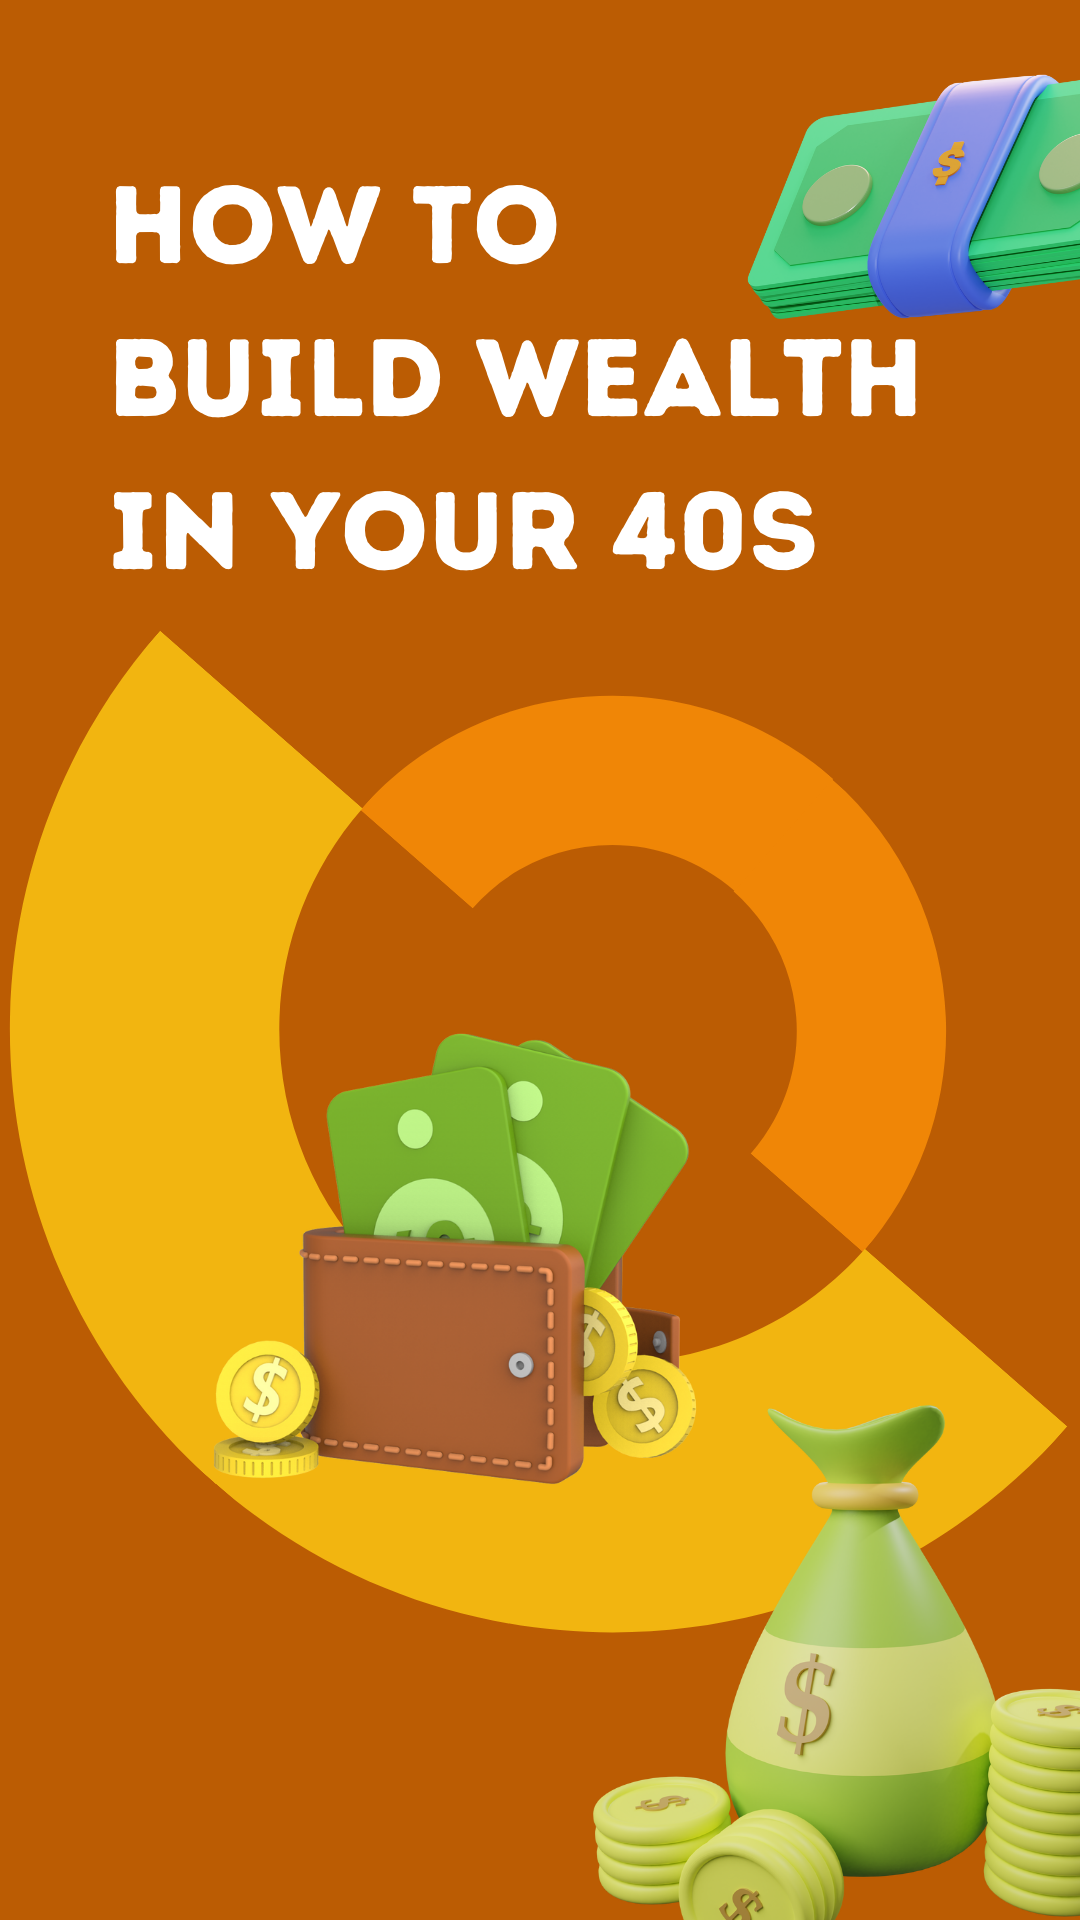 How to build wealth in your 40s